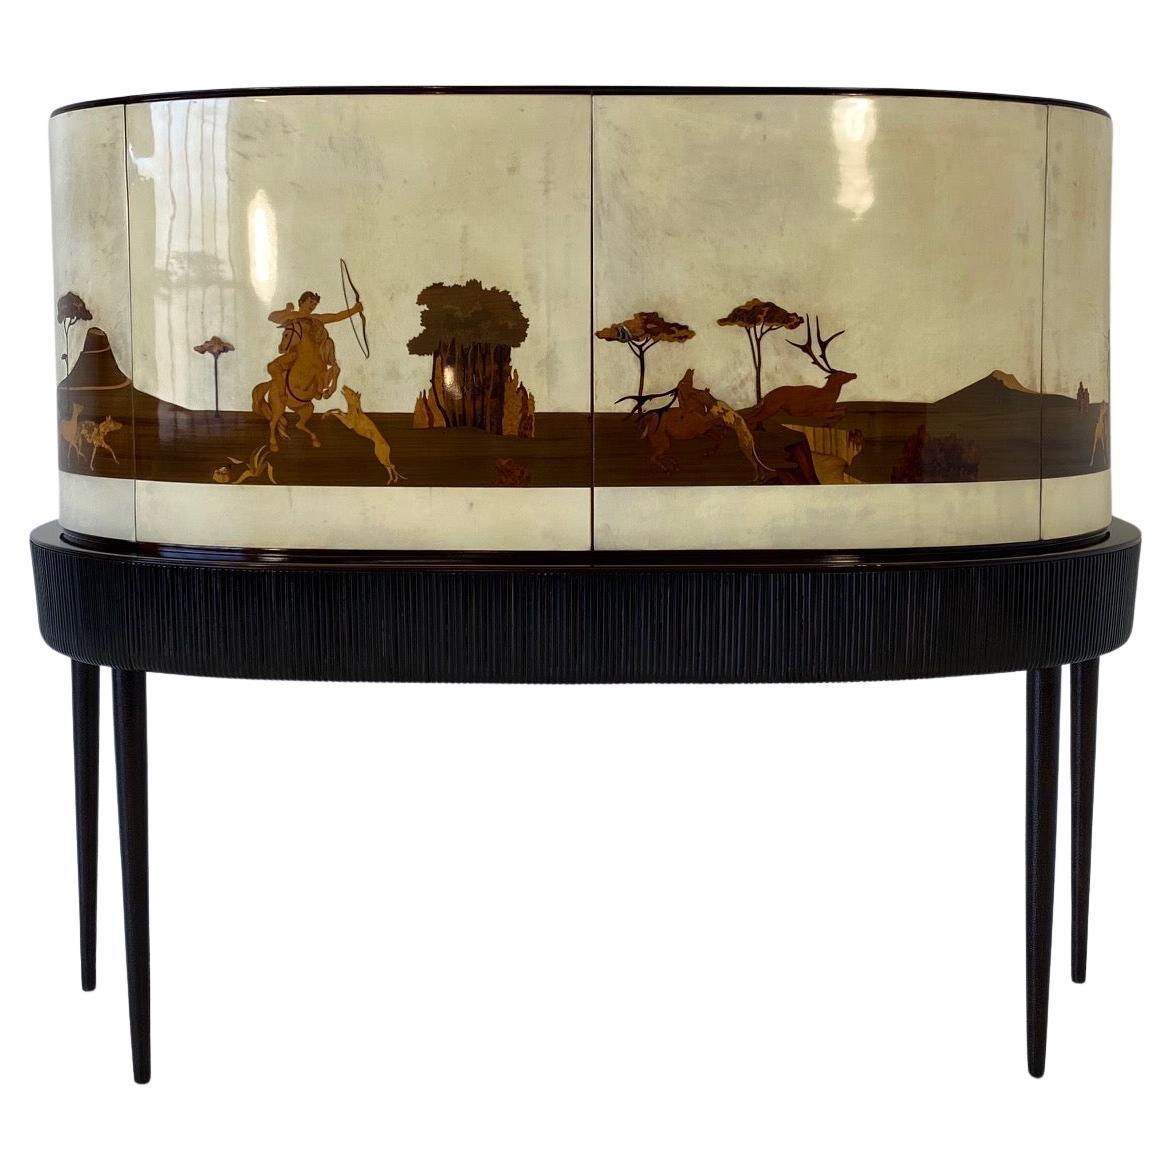 Italian Art Deco Bar Cabinet in Parchment with Inlays Signed by Anzani, 1930s